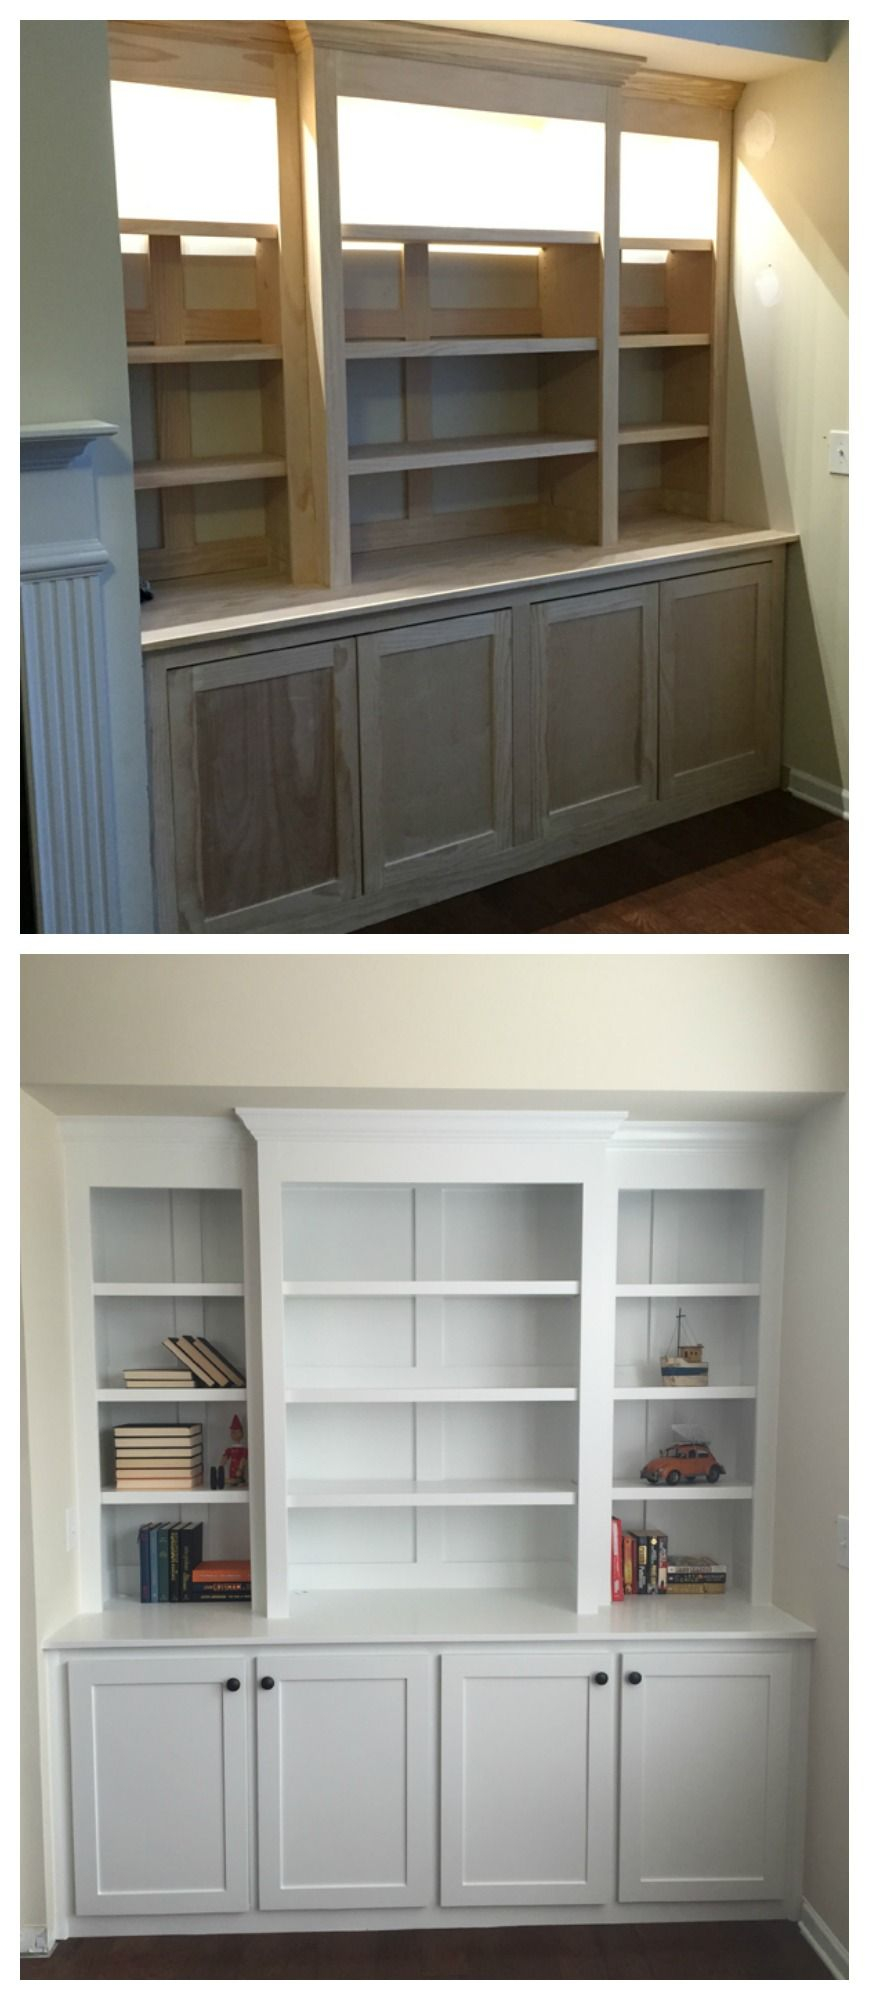 Amazing Diy Built In Buffet Shelving From Plywood And Pine with dimensions 869 X 2000